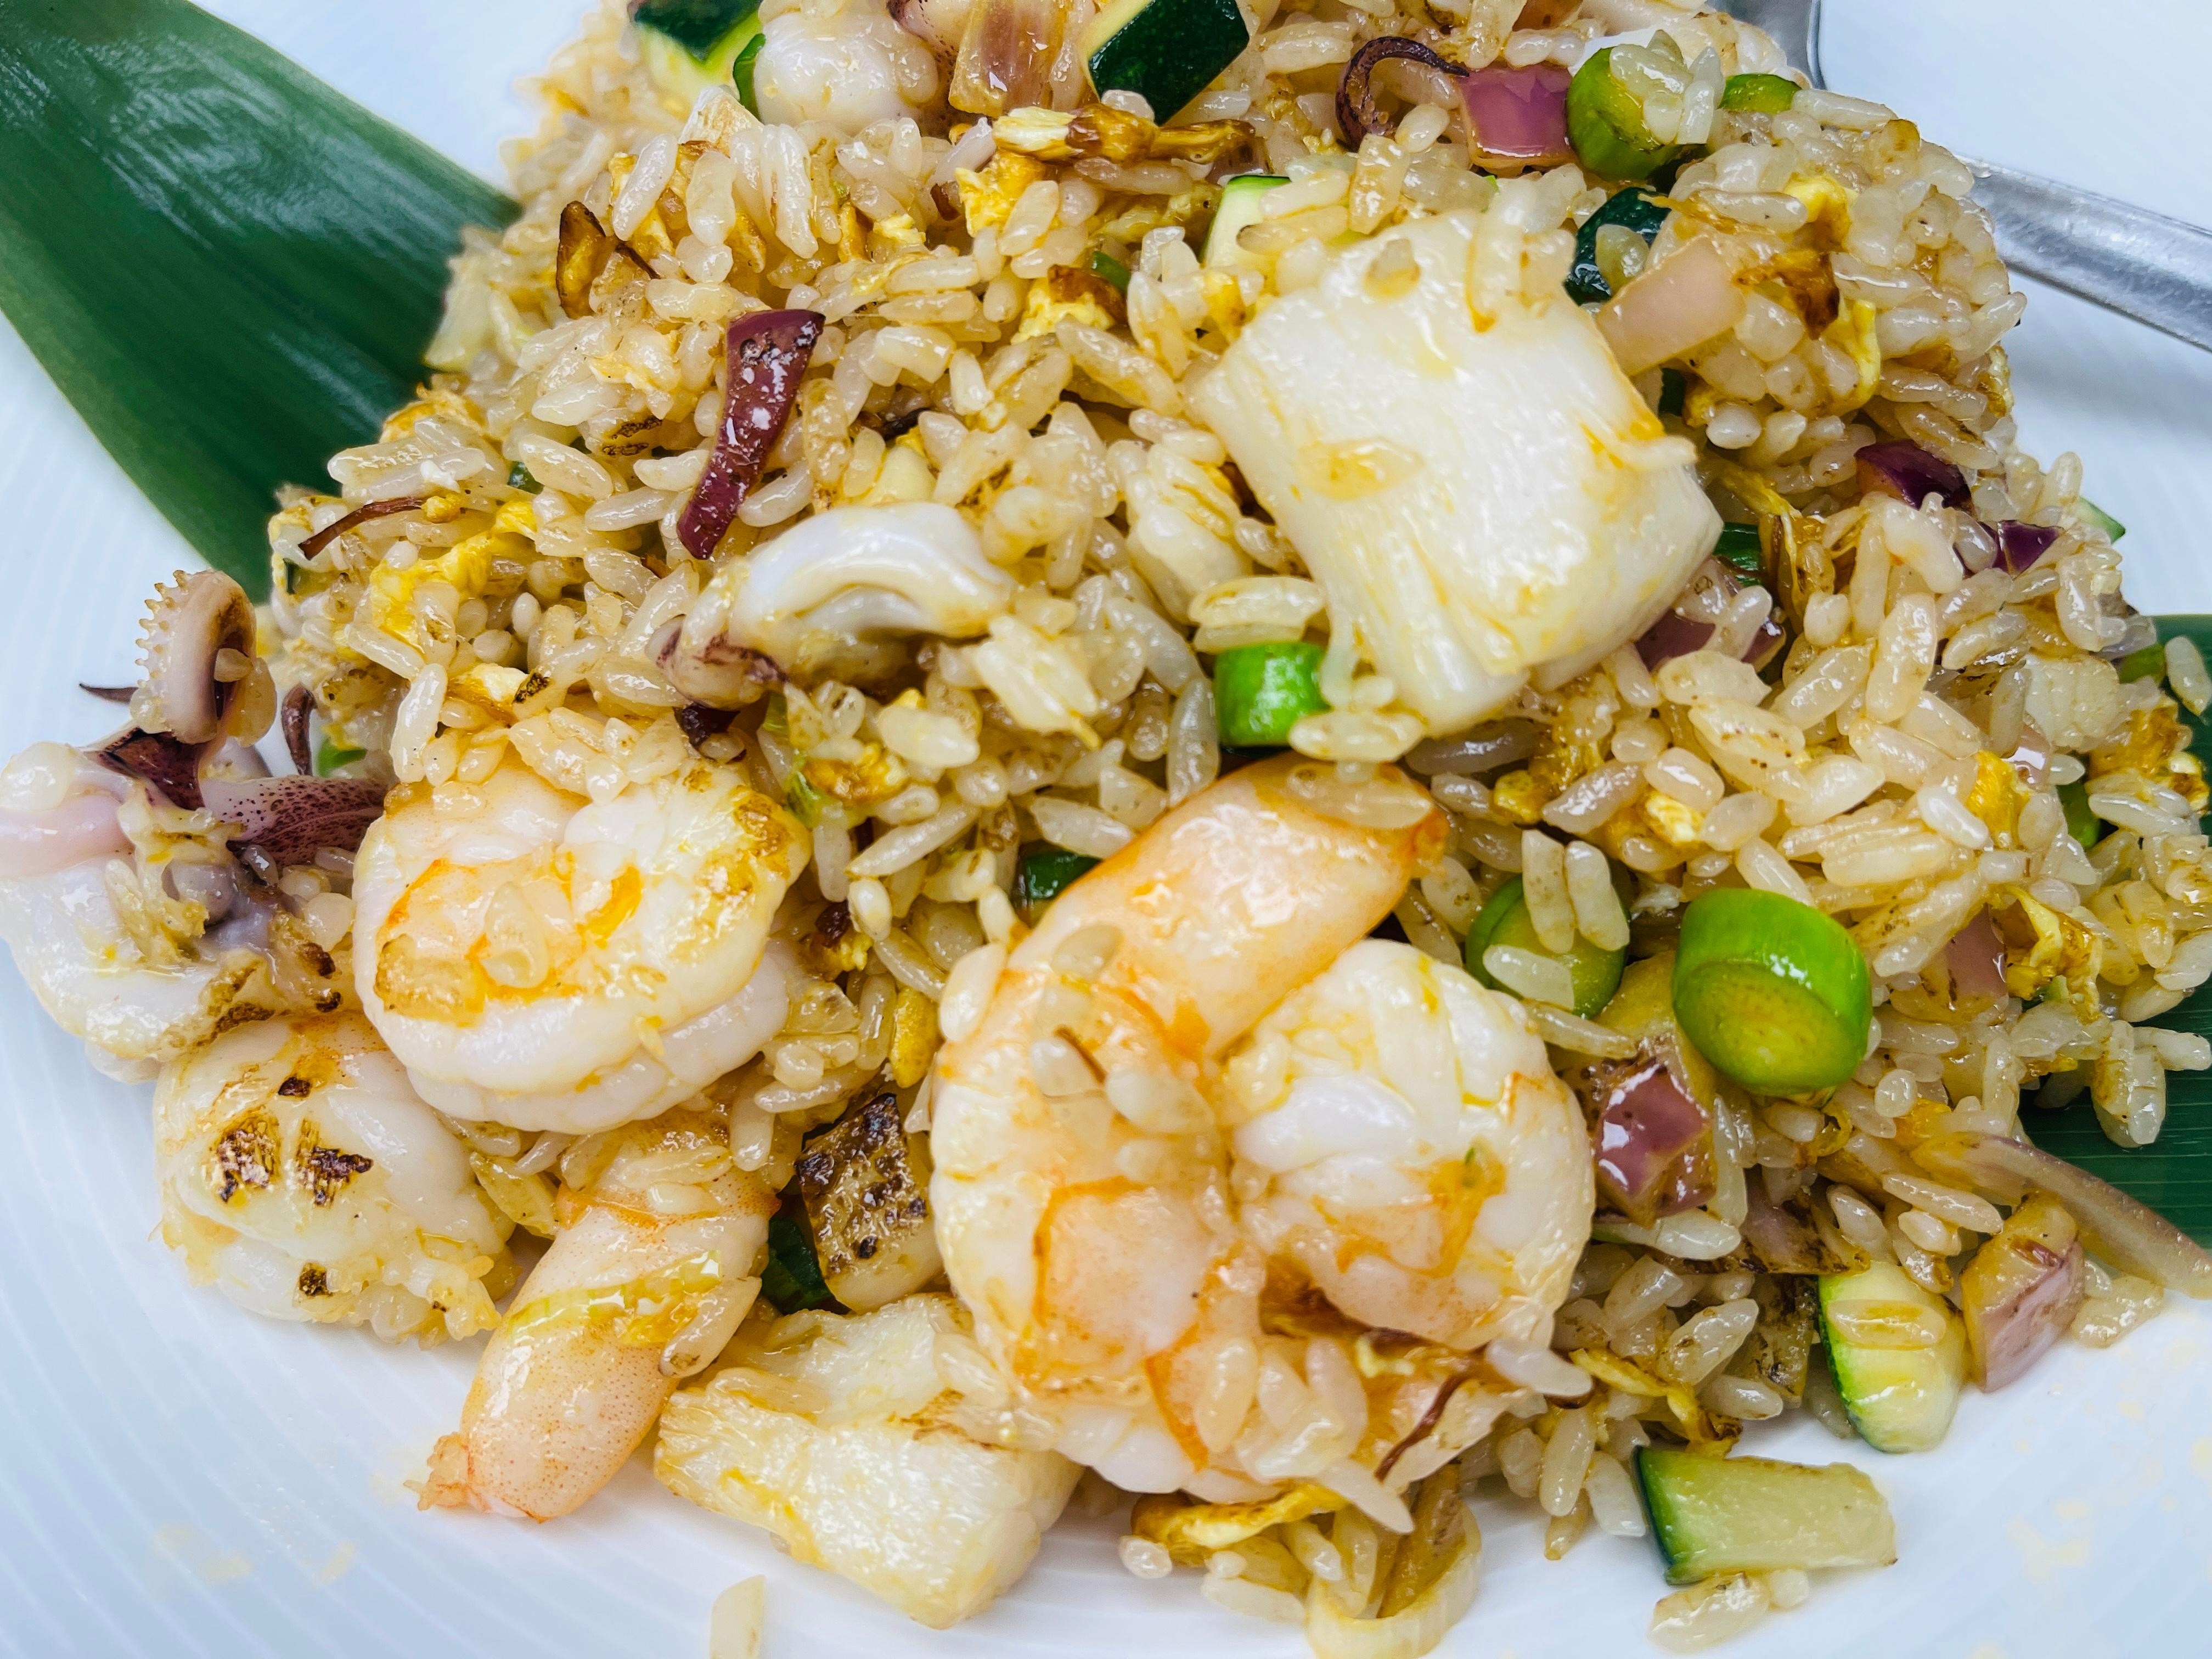 Spicy Seafood Fried Rice 辣海鲜炒饭